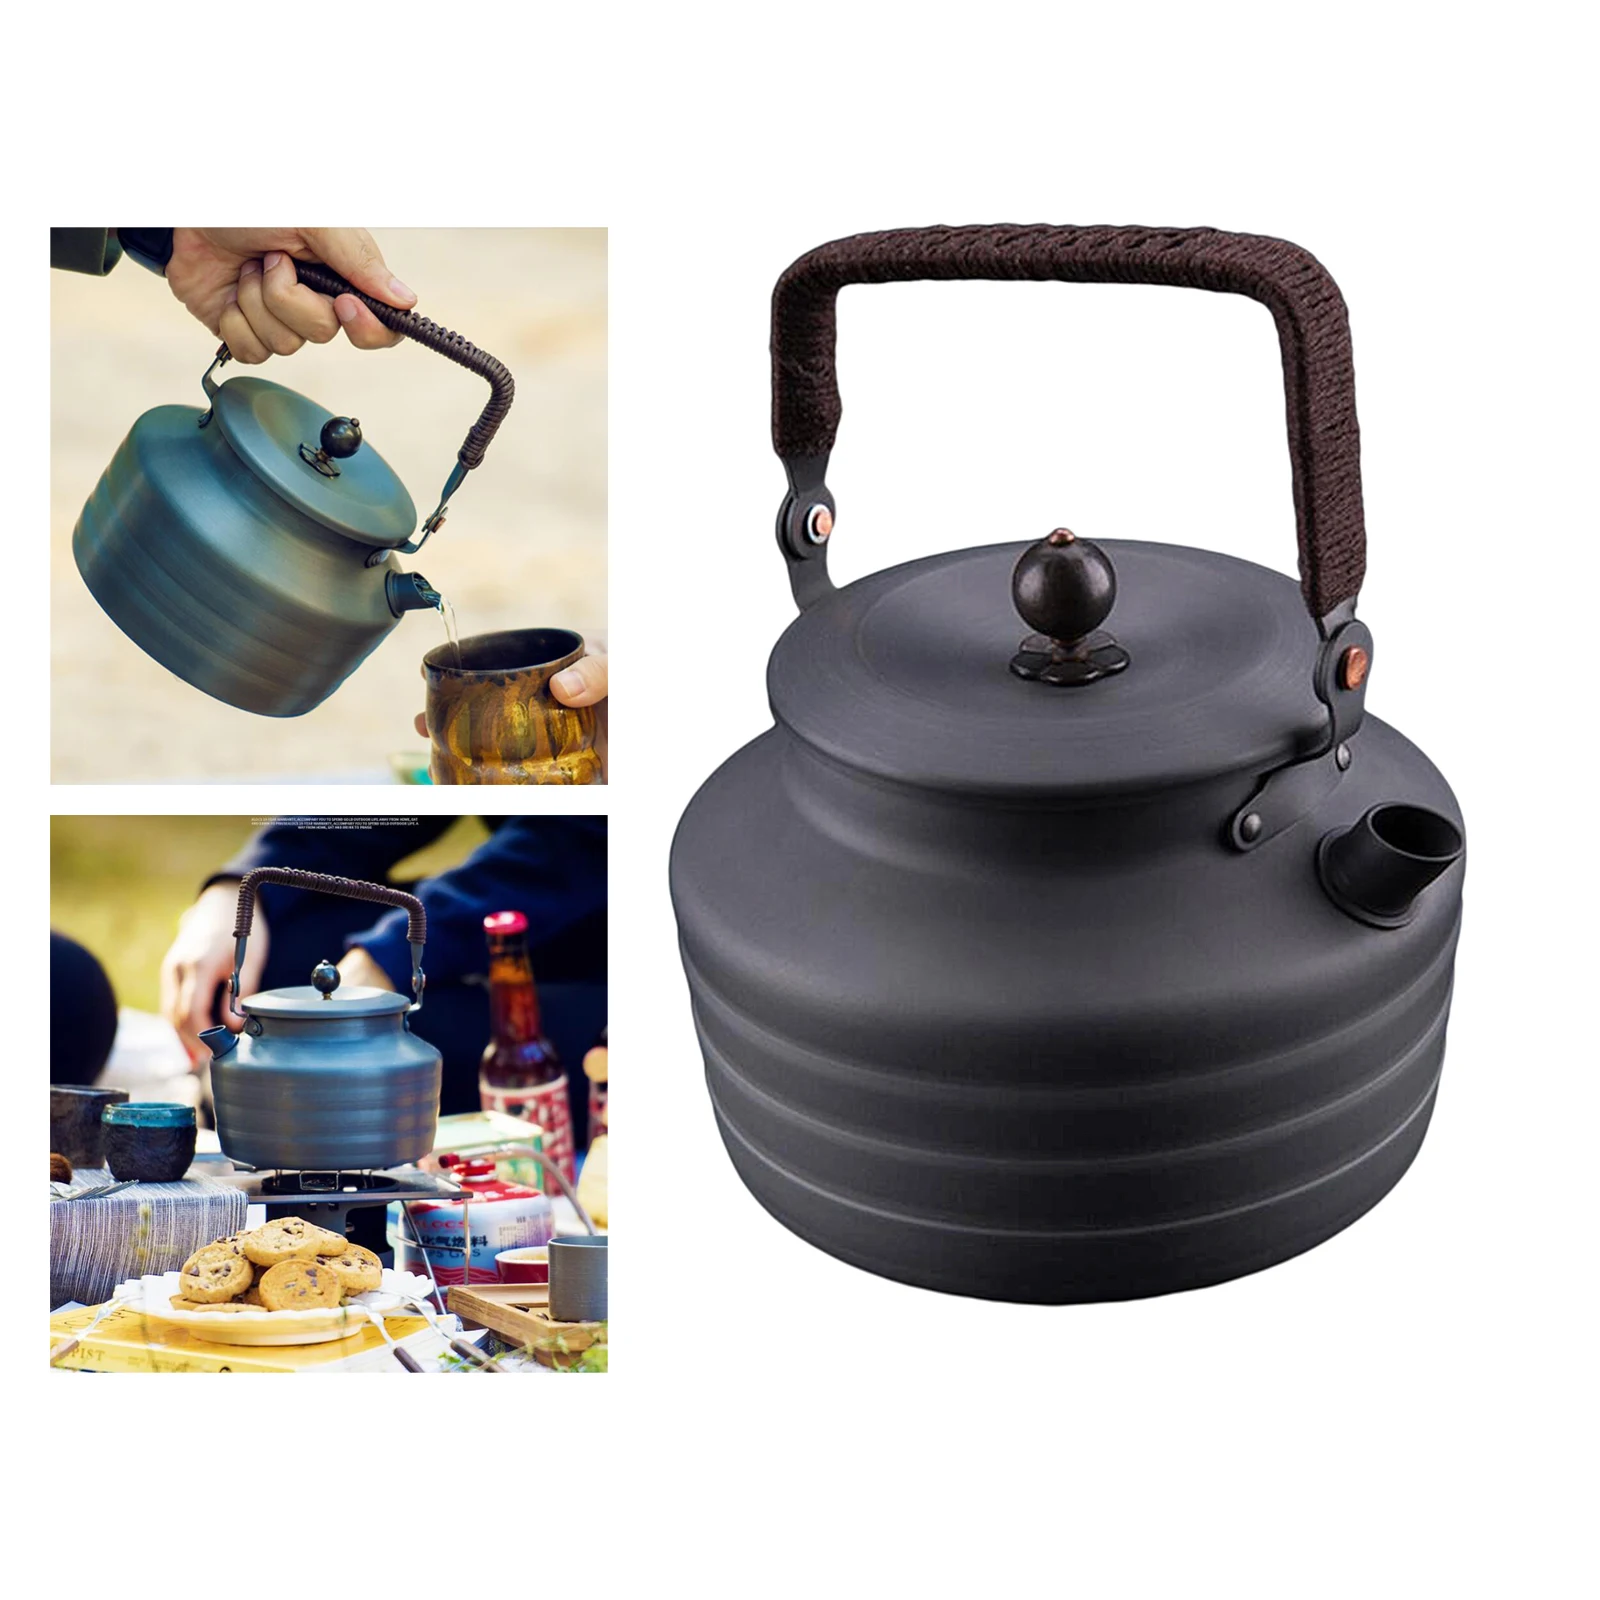 Portable Outdoor Aluminum Alloy Water Kettle Teapot Coffee Pot 1.3L Tableware Cookware For Picnic Camping Hiking Travel